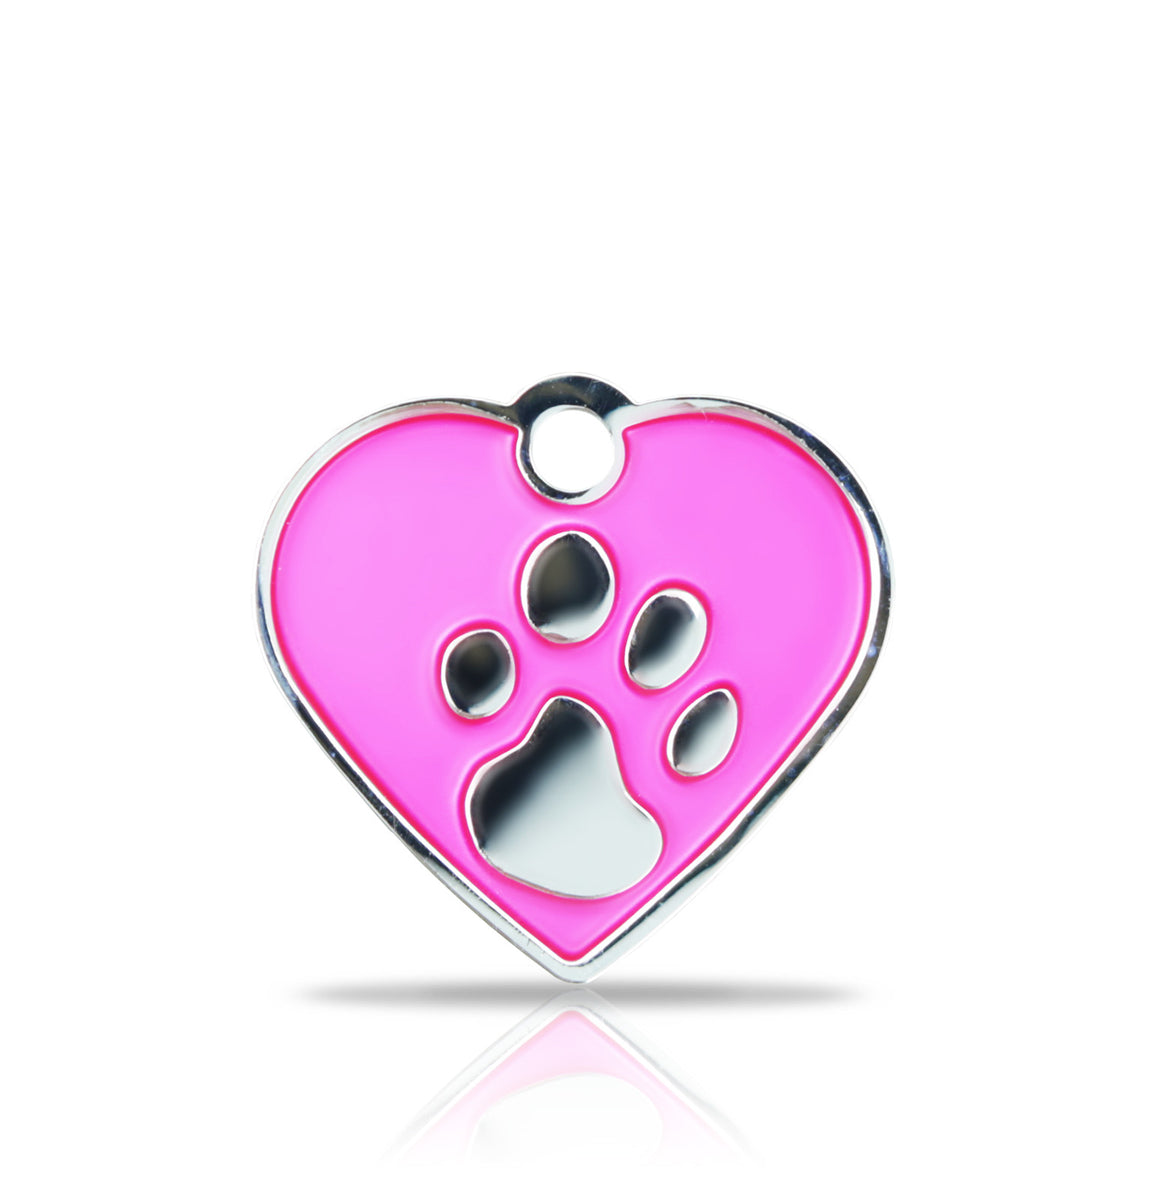 TaggIT Elegance Small Heart Pink & Silver iMarc Engraving Tag